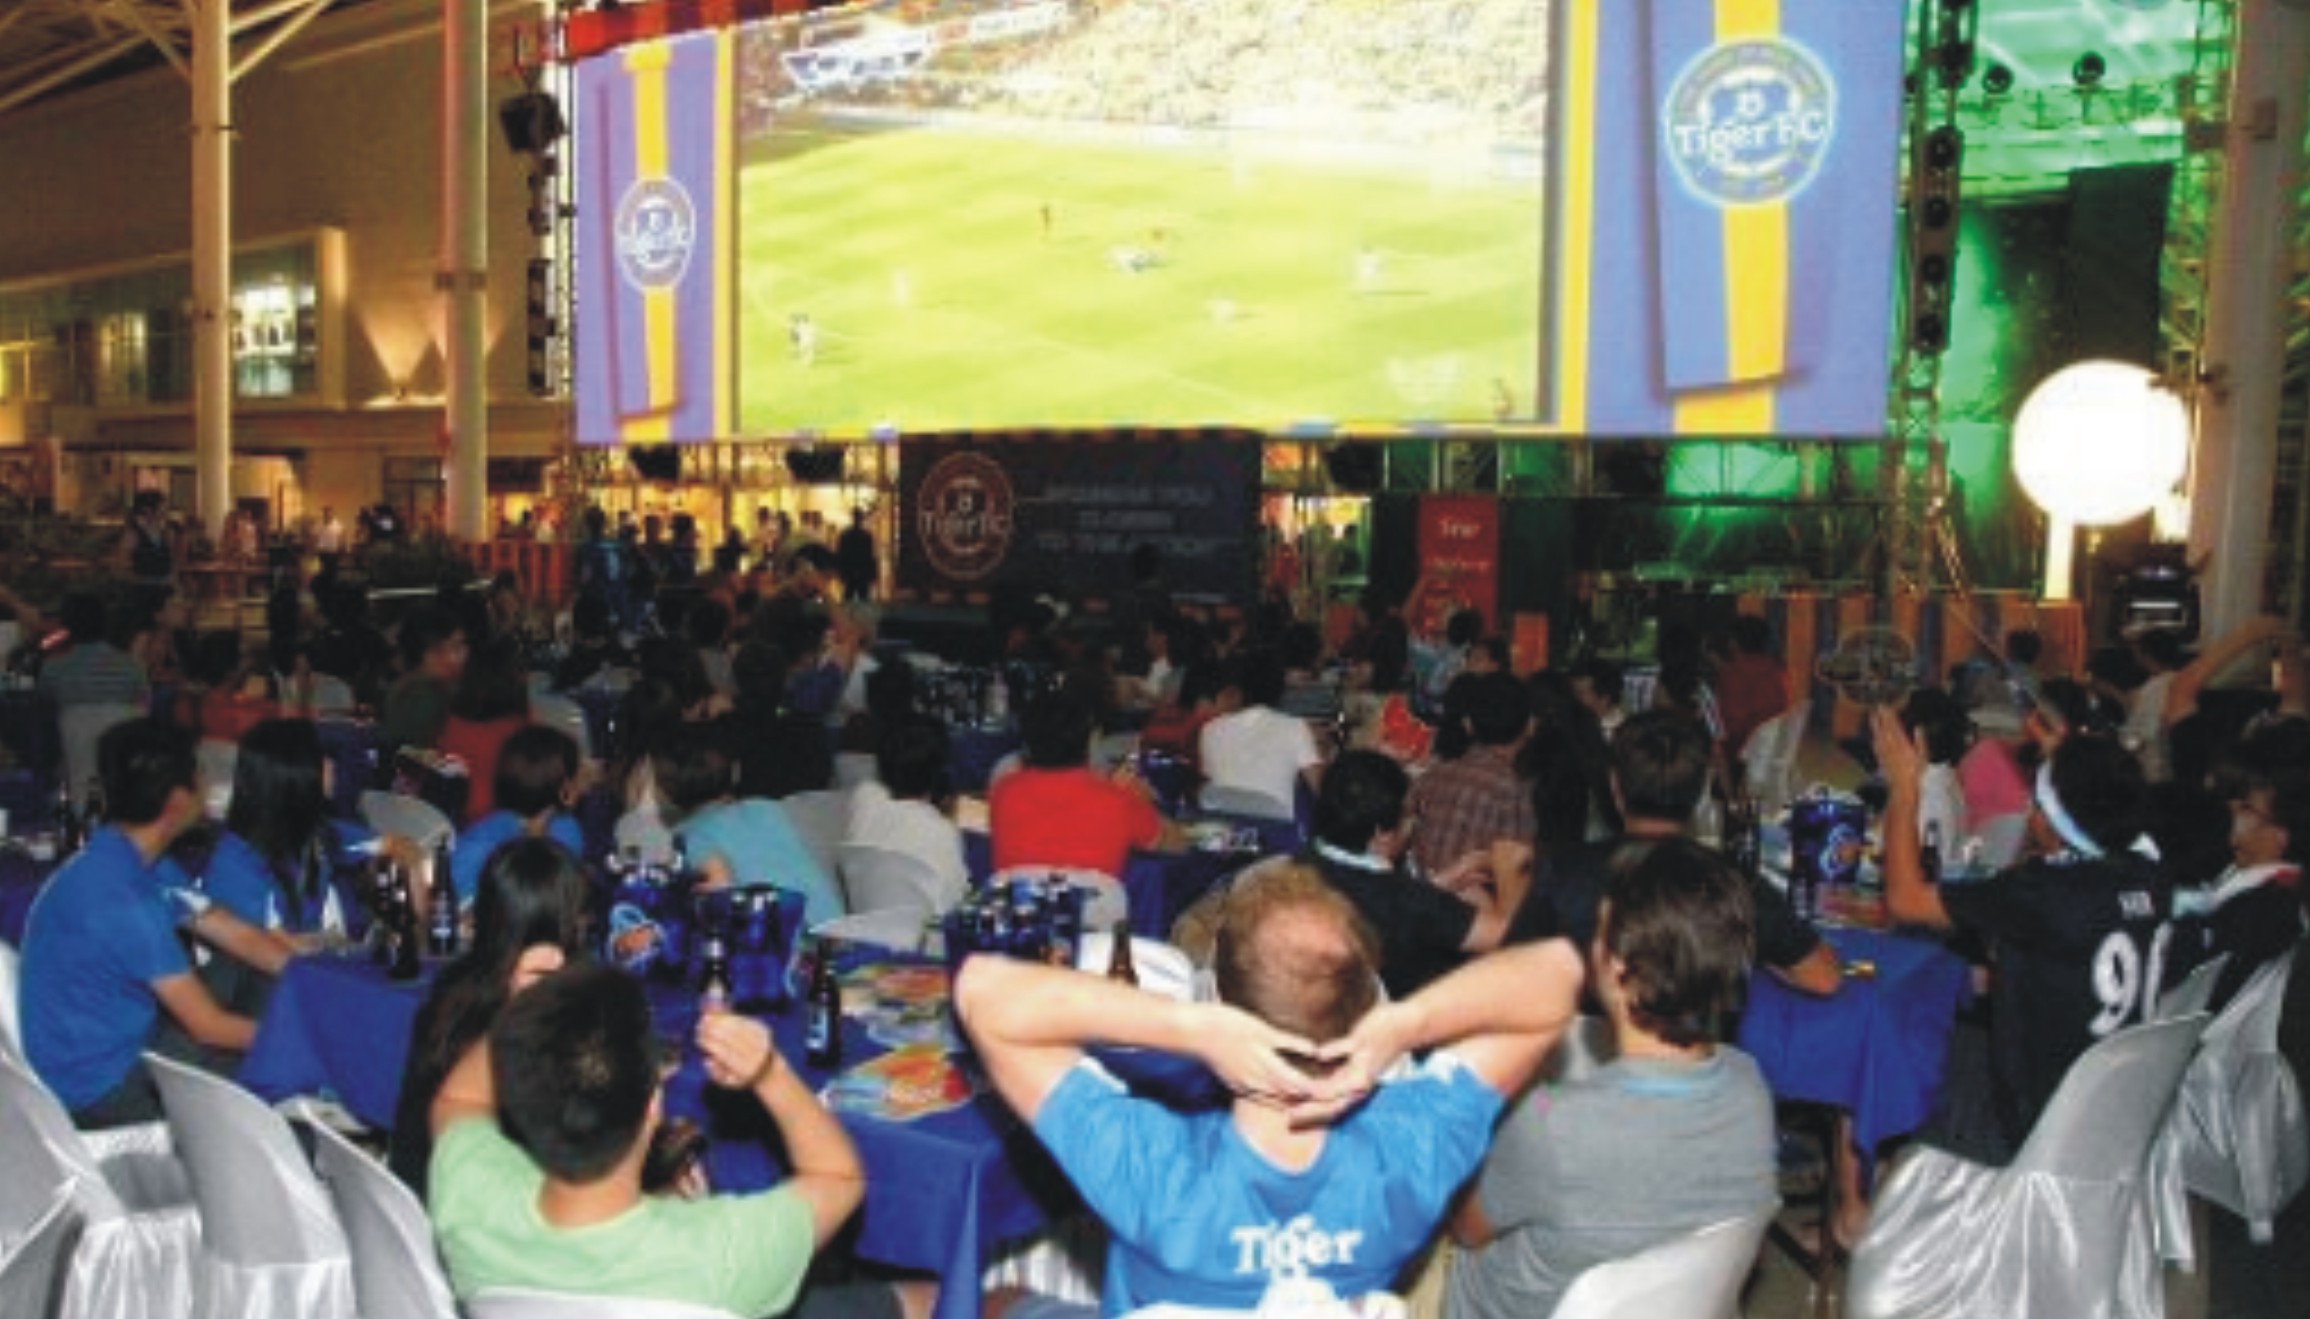 football viewing center business plan in nigeria